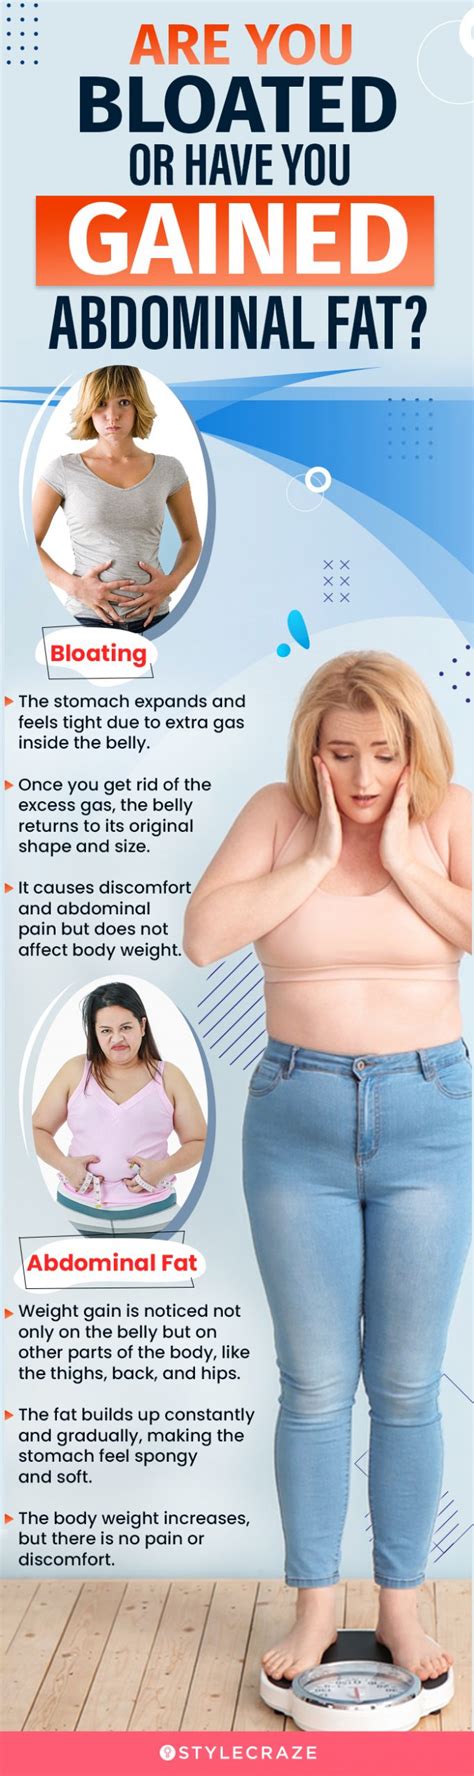 Does bloating cause weight gain?